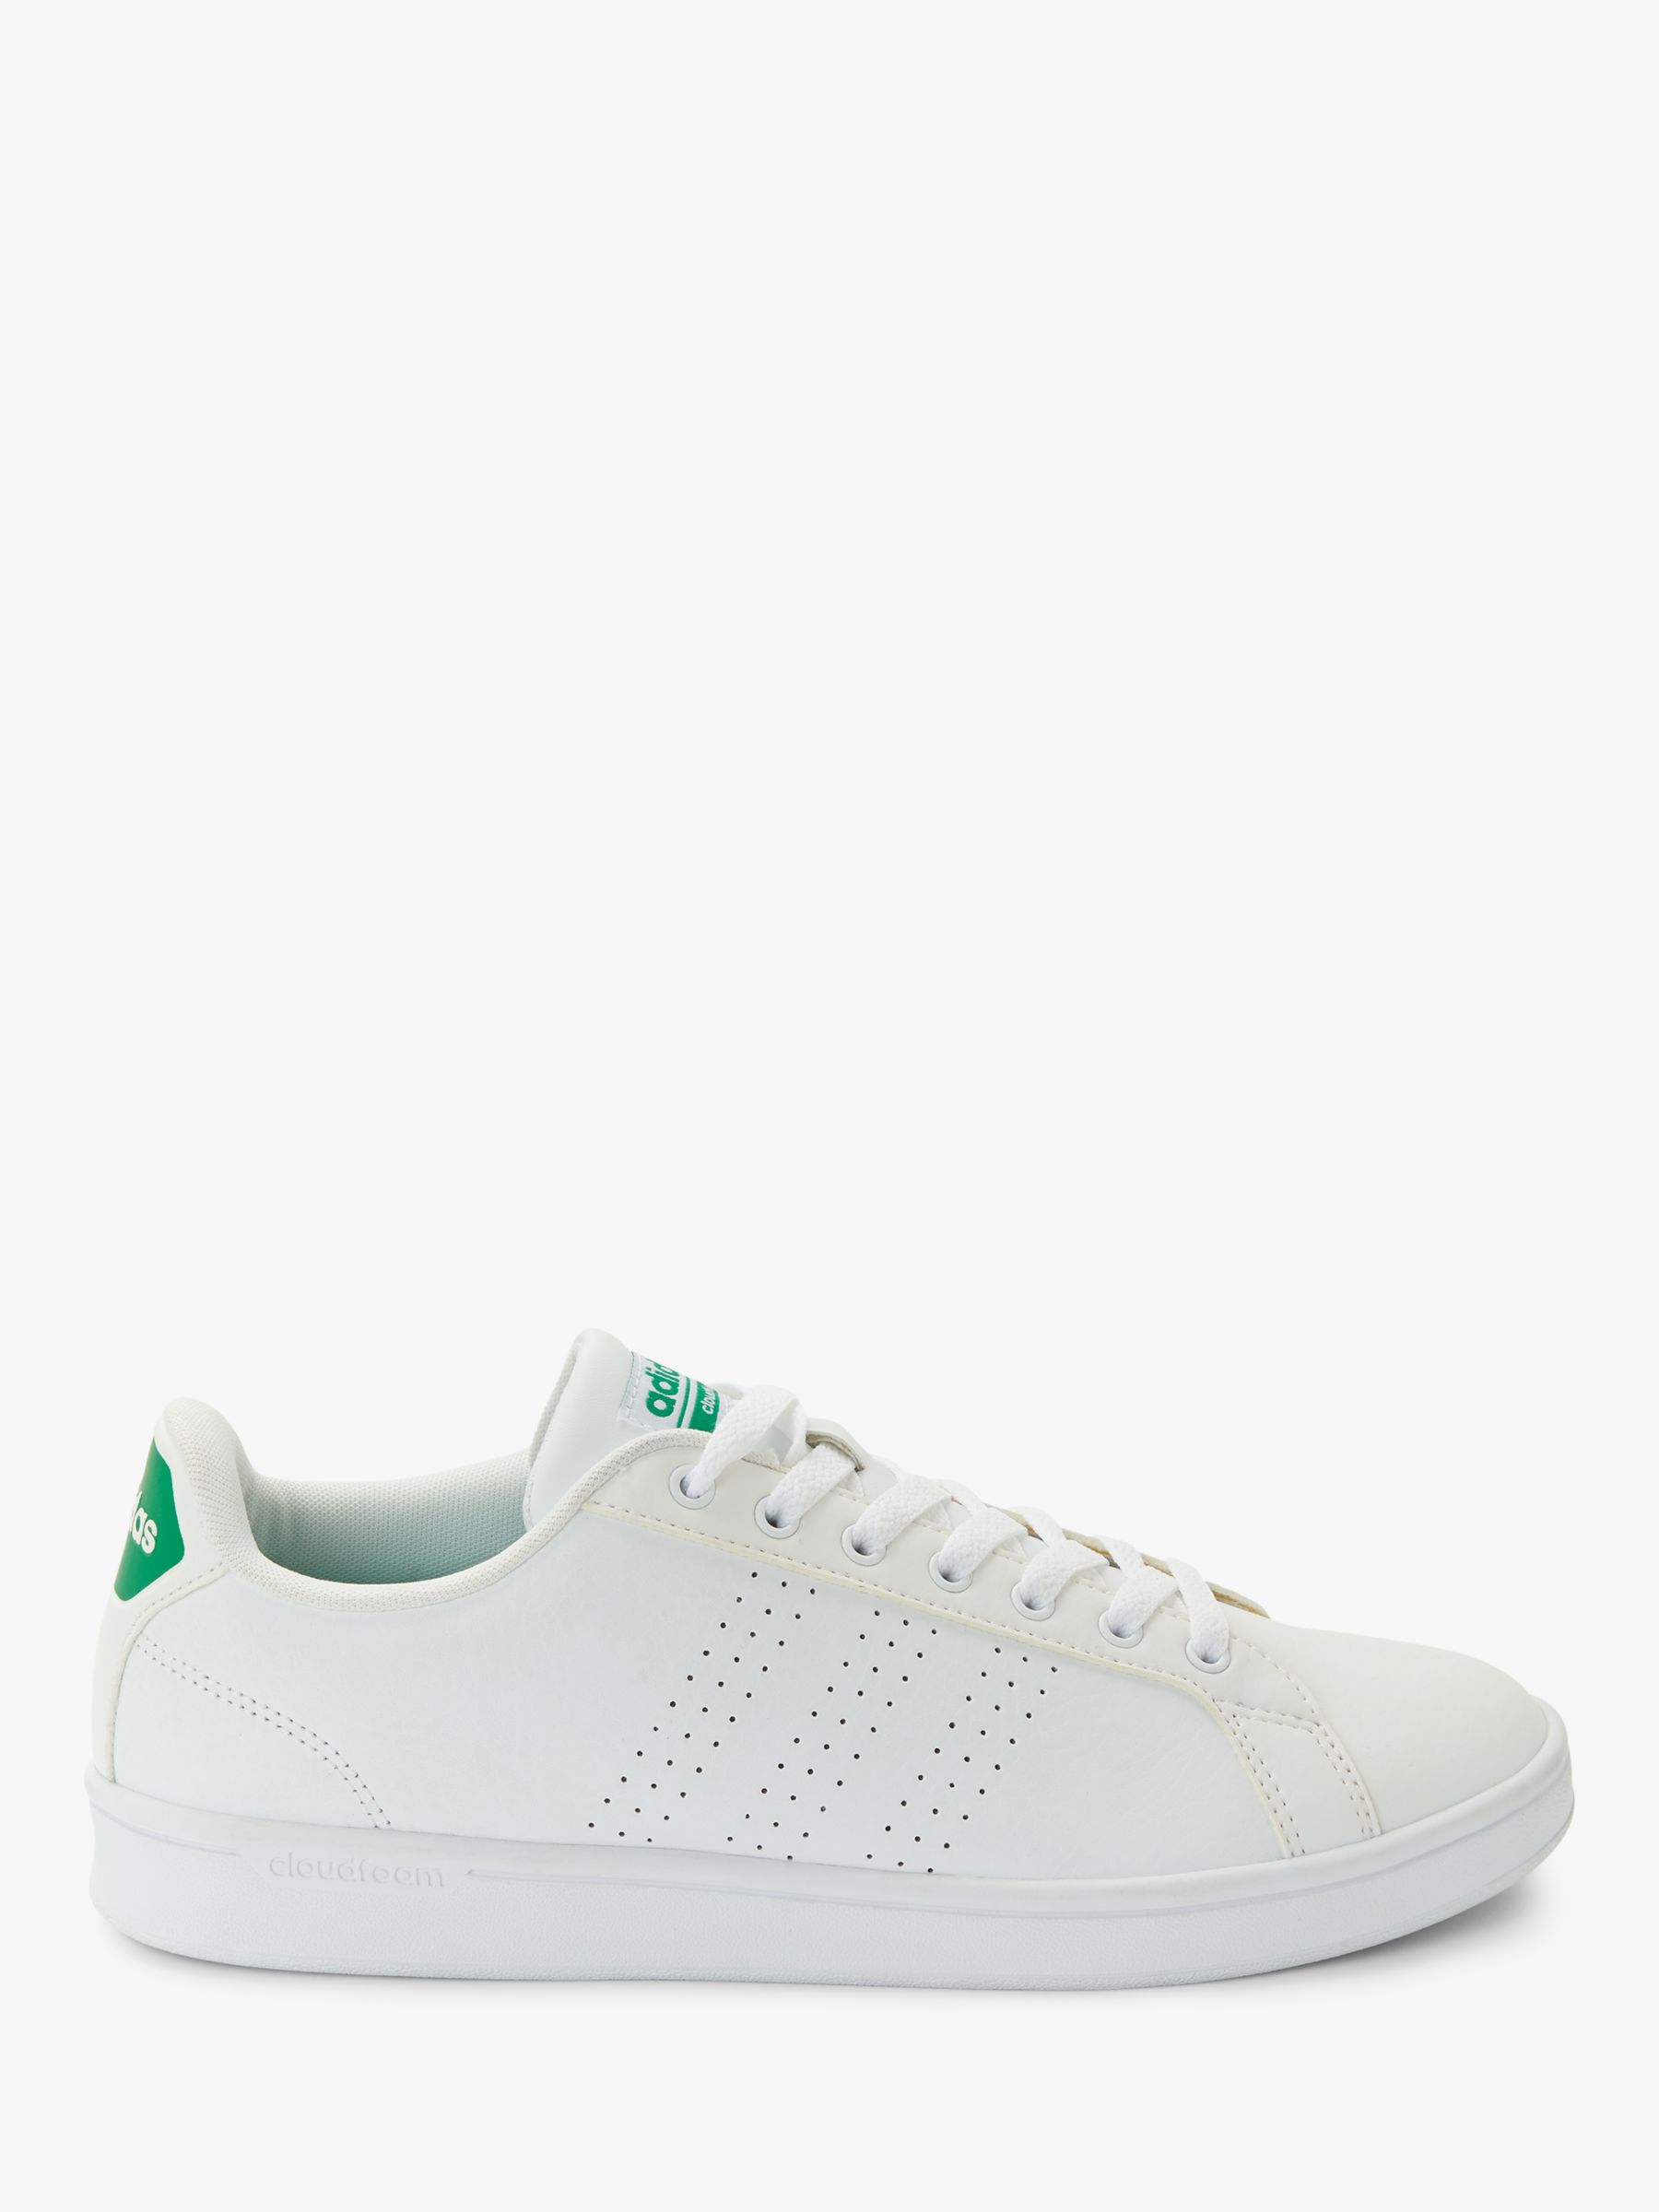 adidas cloudfoam white trainers